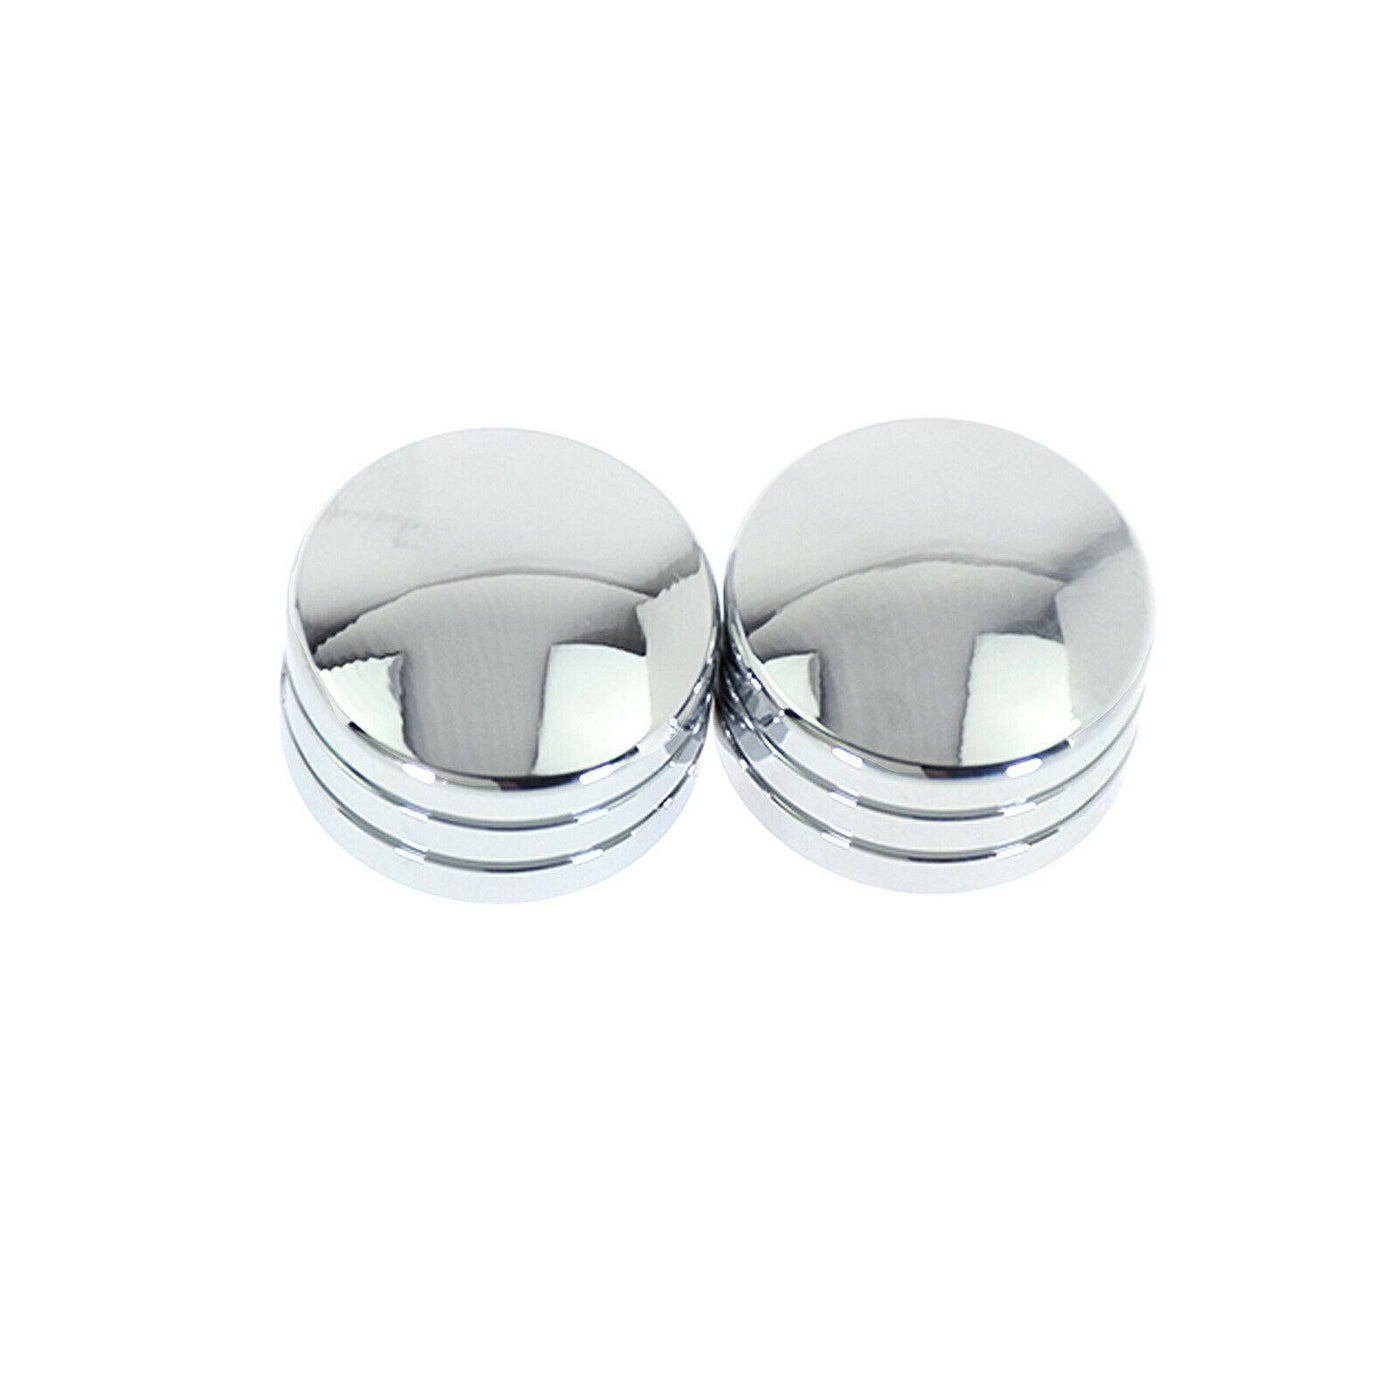 4 Pcs Chrome Head Bolts Covers Spark Plugs Side Case Fit For Harley XL Twin Cam - Moto Life Products